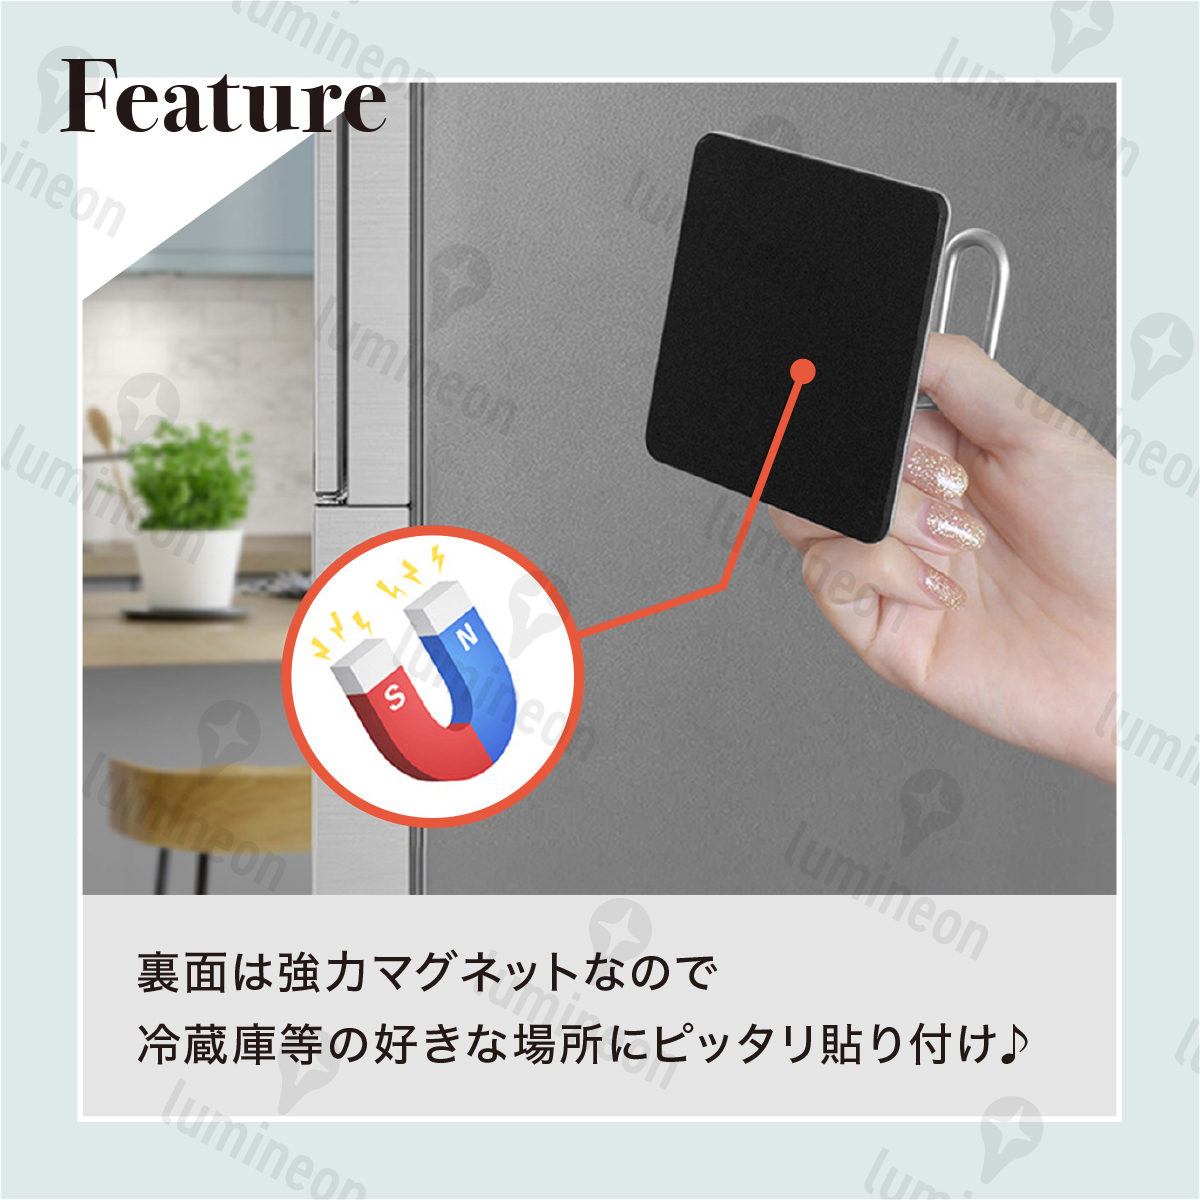  kitchen paper holder storage towel hanger magnet inserting large size stand case cost ko stylish simple g161b 3